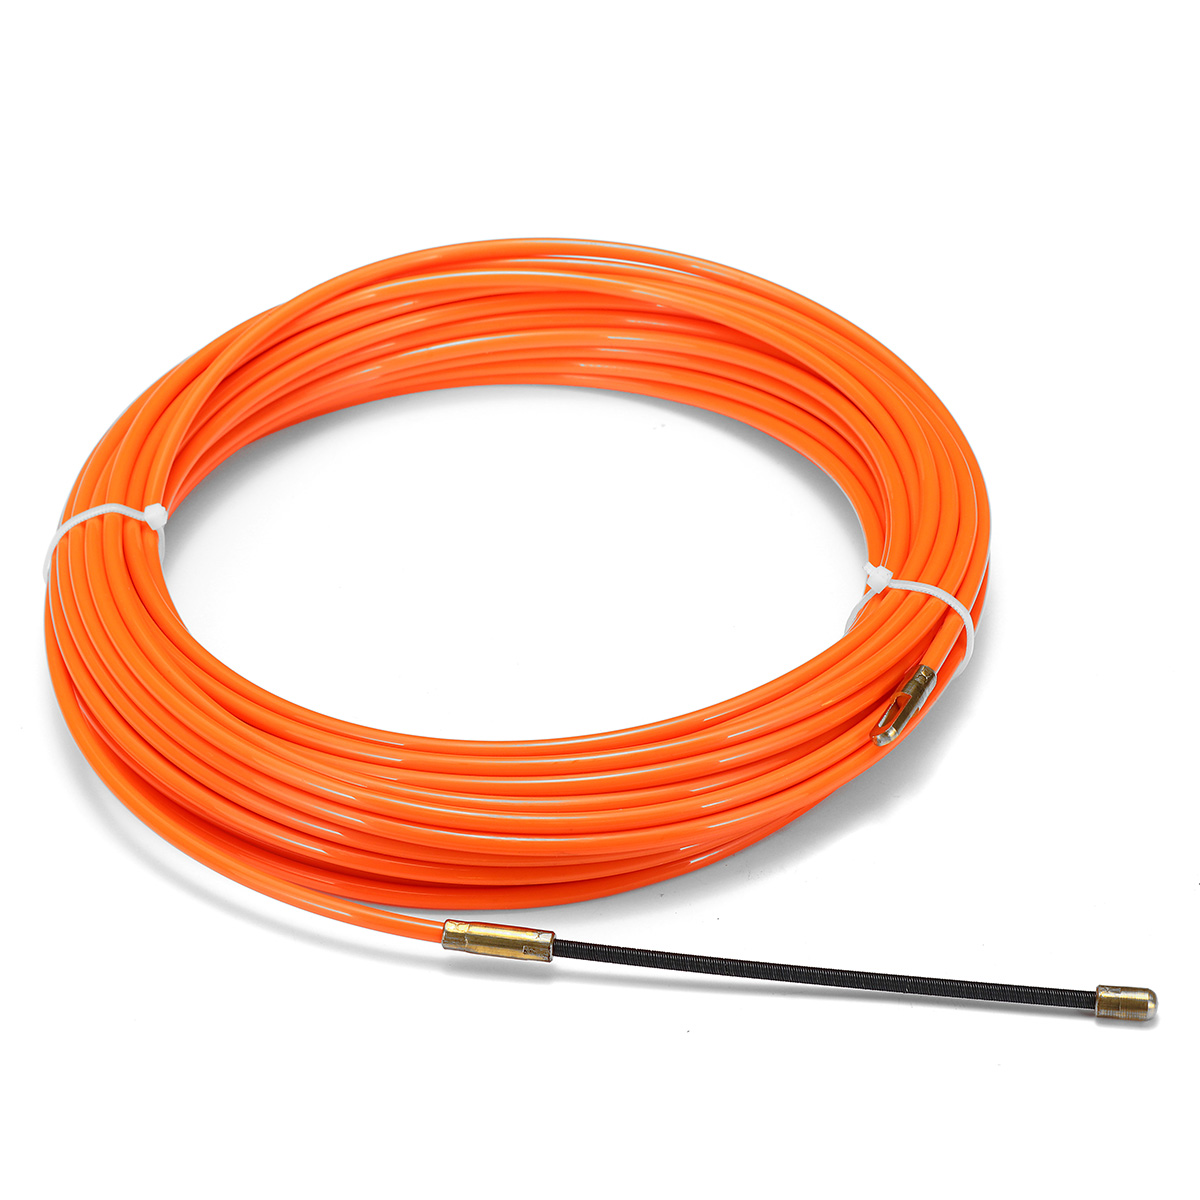 Find Cable Push Puller Reel Conduit Nylon Snake Fish Tape Wire Orange 4mm 15m for Sale on Gipsybee.com with cryptocurrencies